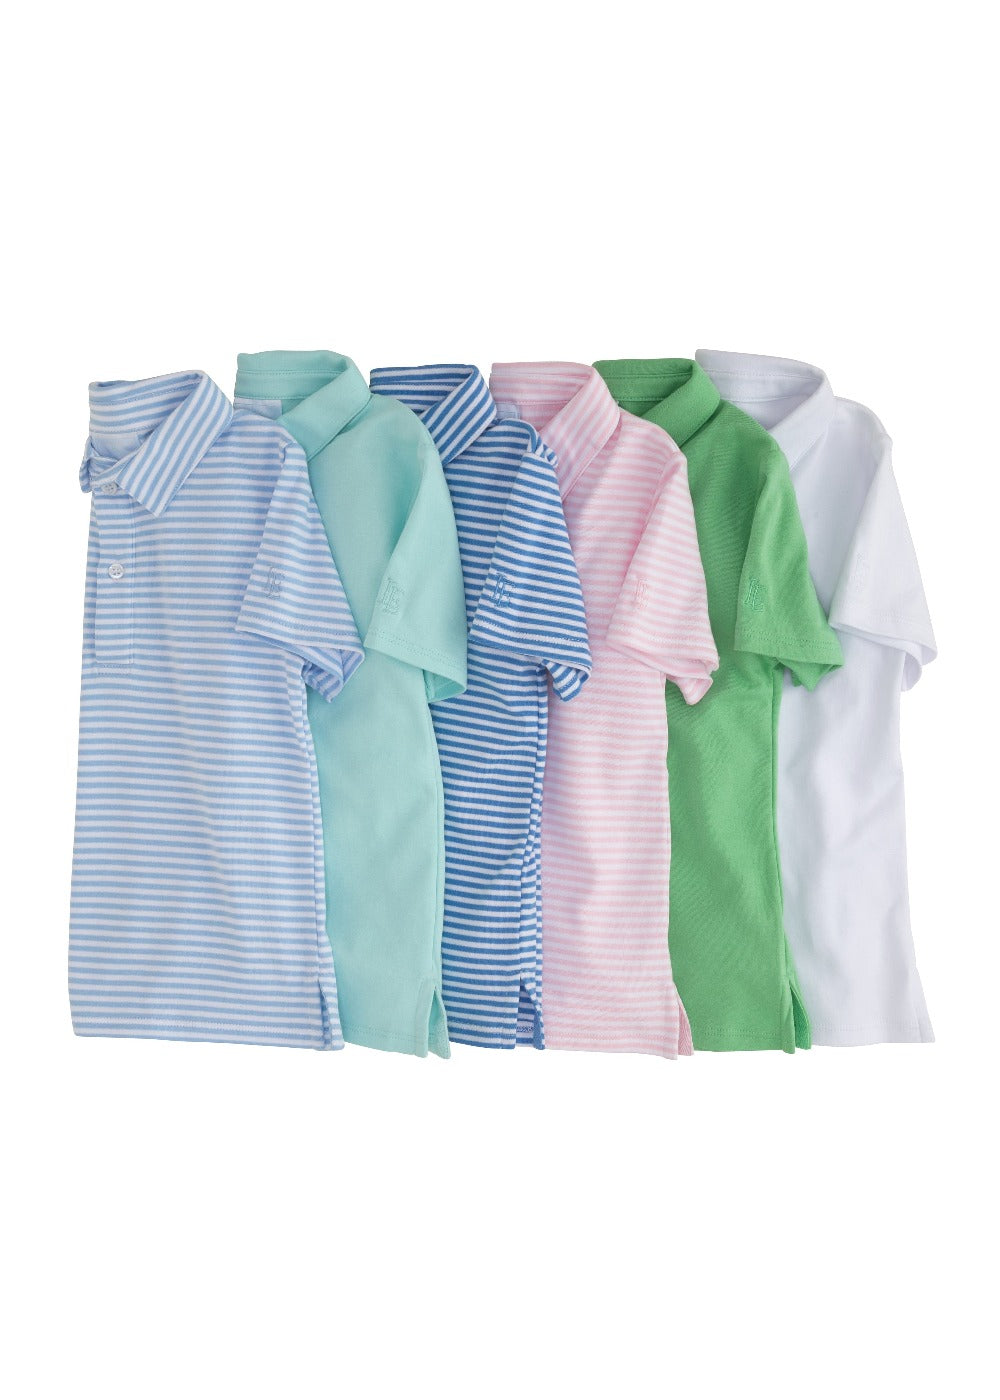 seguridadindustrialcr boy's solid and striped short sleeve polos